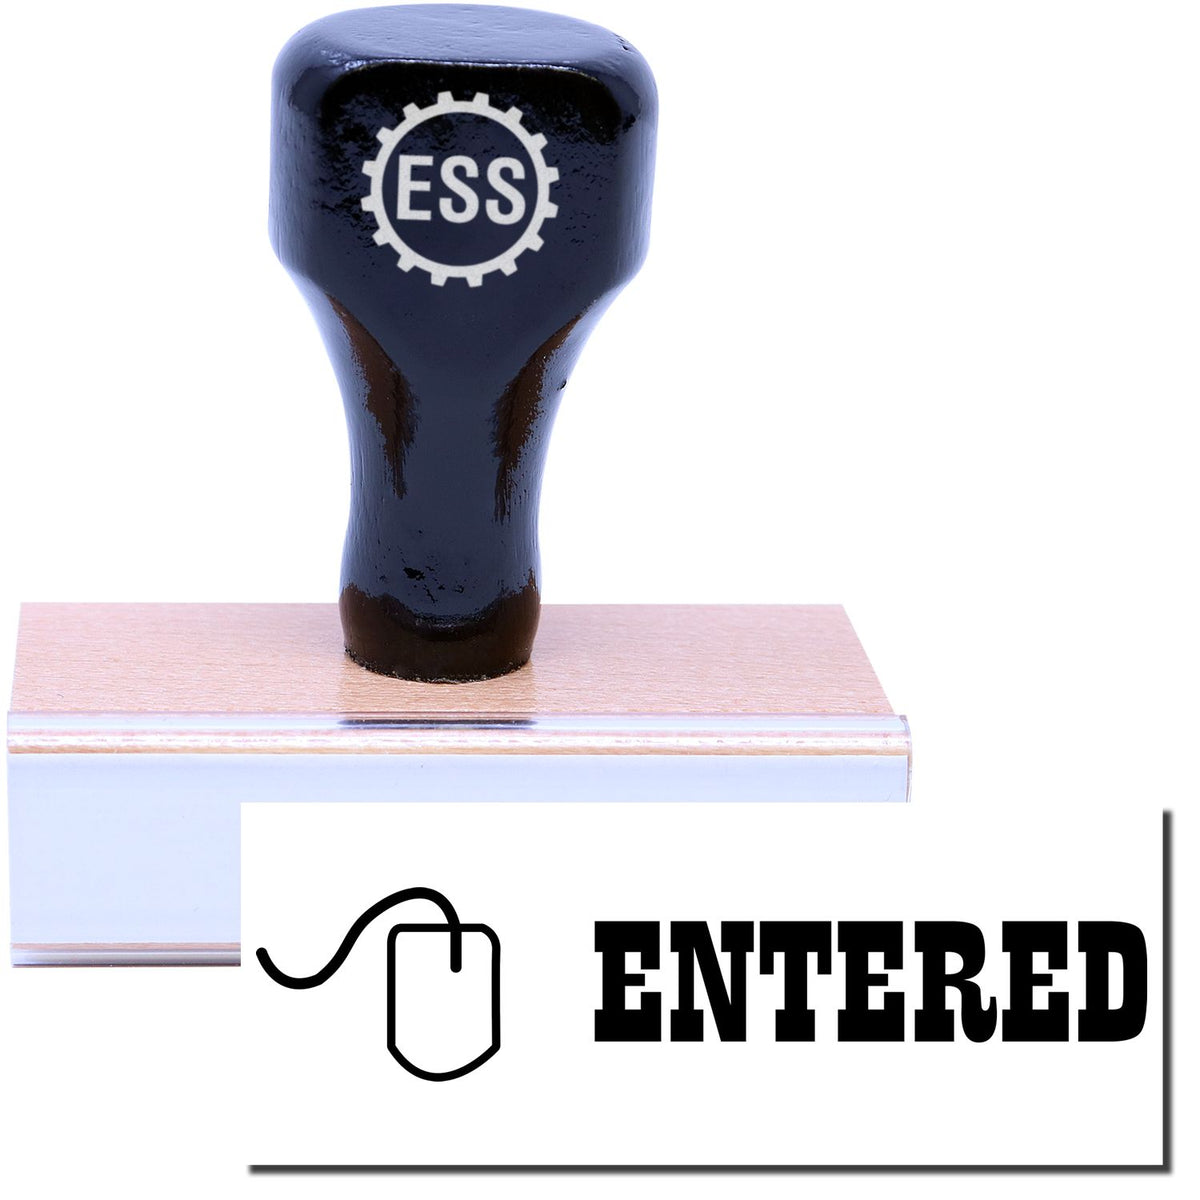 A stock office rubber stamp with a stamped image showing how the text &quot;ENTERED&quot; in a large bright font with a small icon of a mouse on the left side is displayed after stamping.